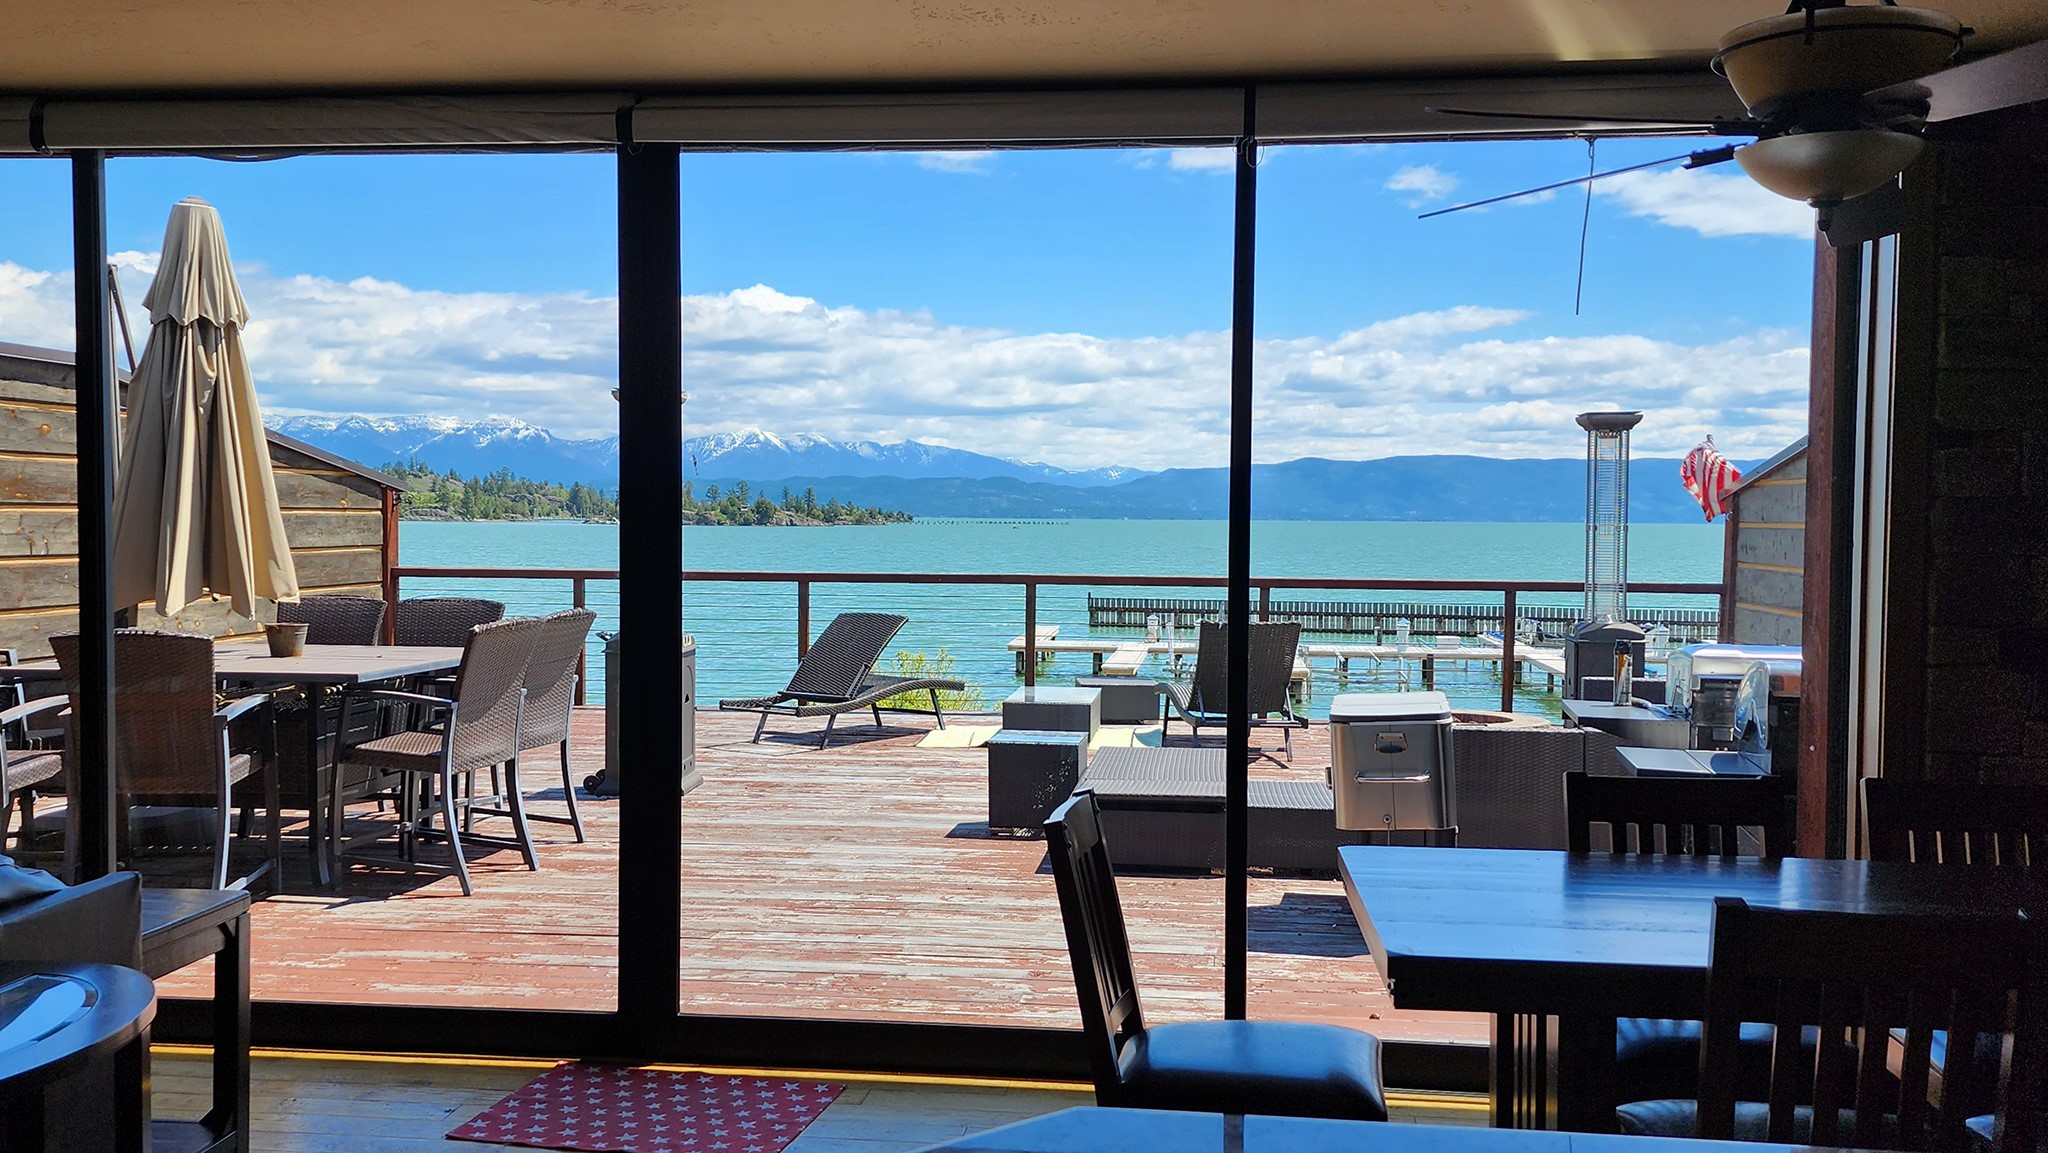 Lakefront condominium at the north end of Flathead Lake in Somers in The Terraces complex.  This unit is one of only four closest to the lakefront and boat slips.  It has a huge deck and views of the lake and mountains across. Inside is an open concept Living Space with fireplace, ample Dining area and gourmet Kitchen with Viking stove. The Primary Suite has a luxurious bathroom and walk-in closet.  For guests there is another bedroom en suite and a third versatile room outfitted with a pull-down bed (or one could use this as an office) Indoor parking garage, storage closet and an association fitness room.  Boat slips are assigned.